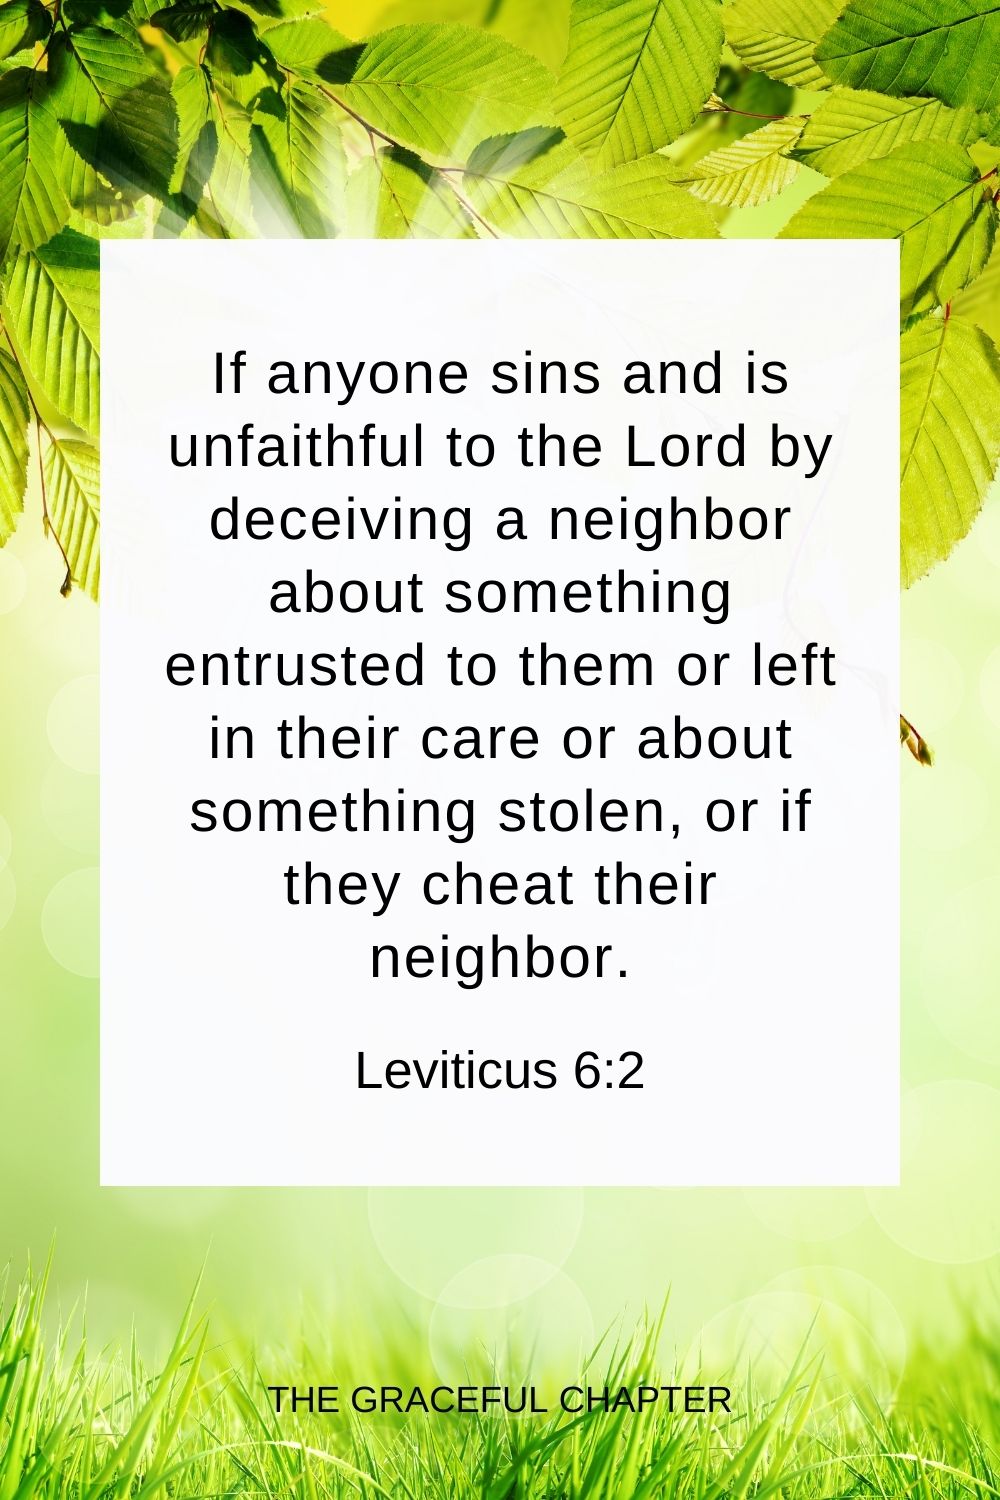 If anyone sins and is unfaithful to the Lord by deceiving a neighbor about something entrusted to them or left in their care or about something stolen, or if they cheat their neighbor. Leviticus 6:2